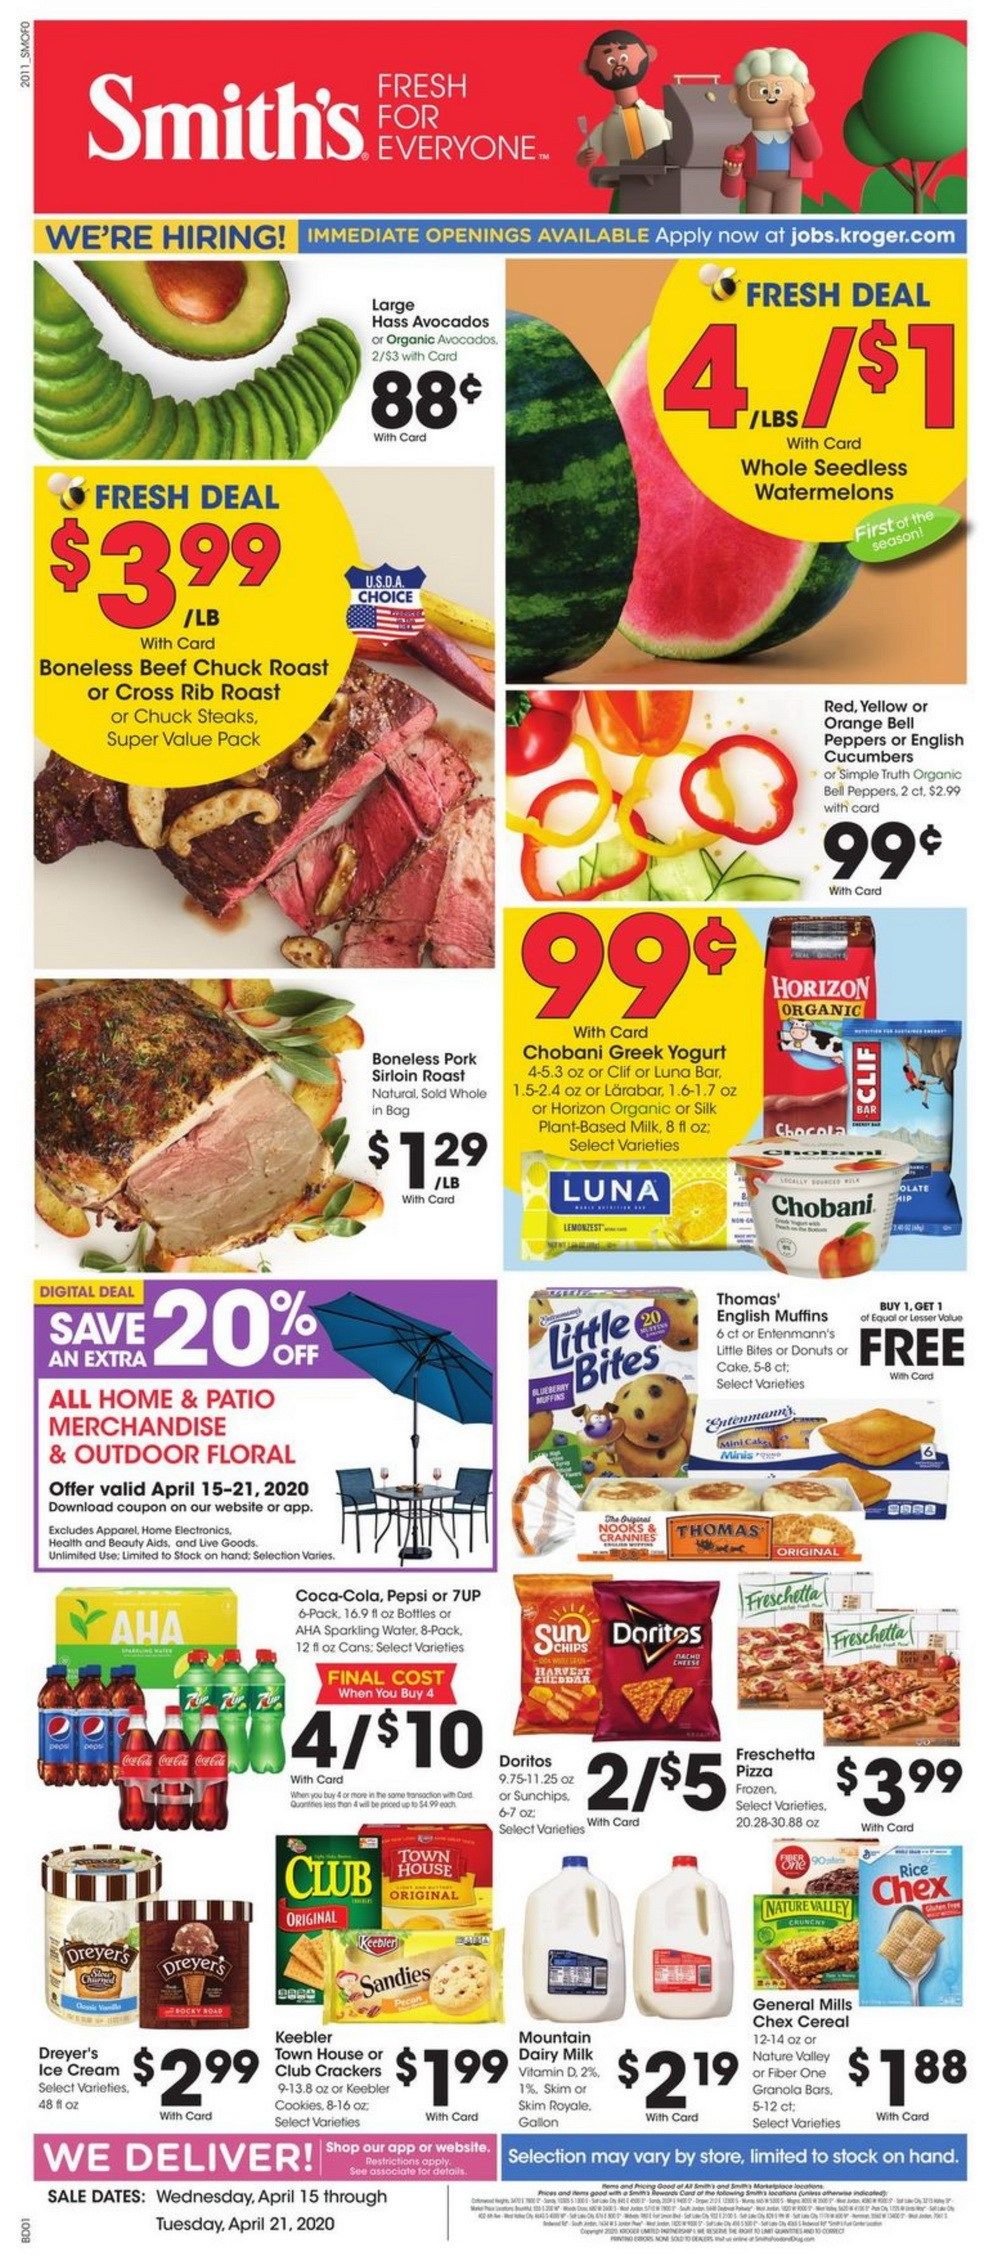 Smith's Food and Drug Weekly Circular Apr 15- Apr 21, 2020